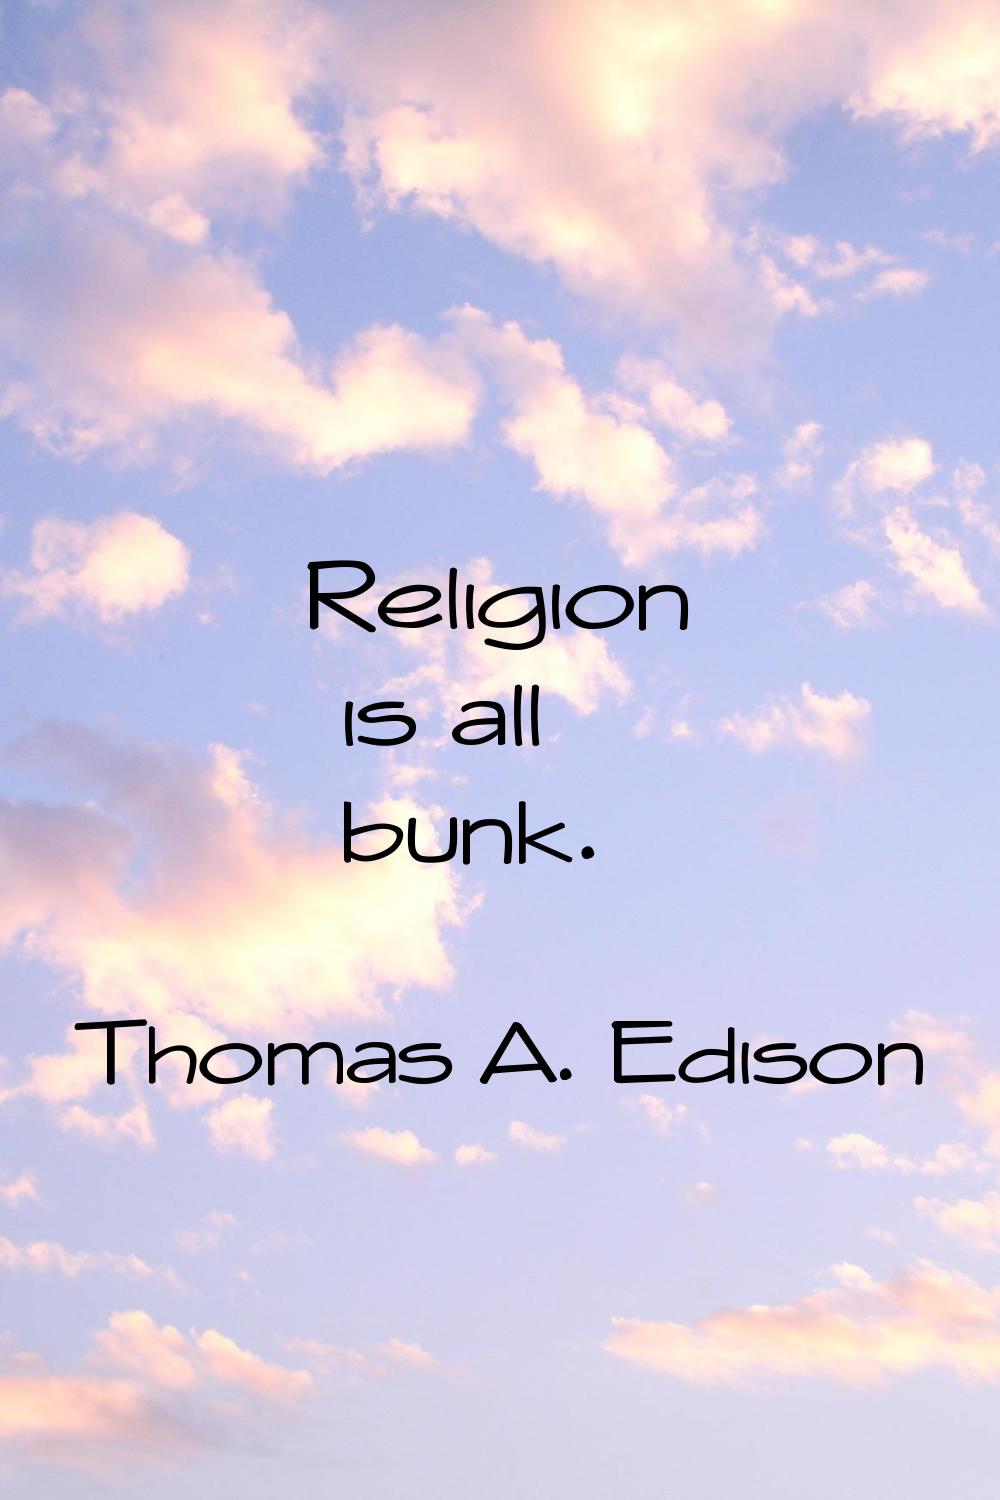 Religion is all bunk.